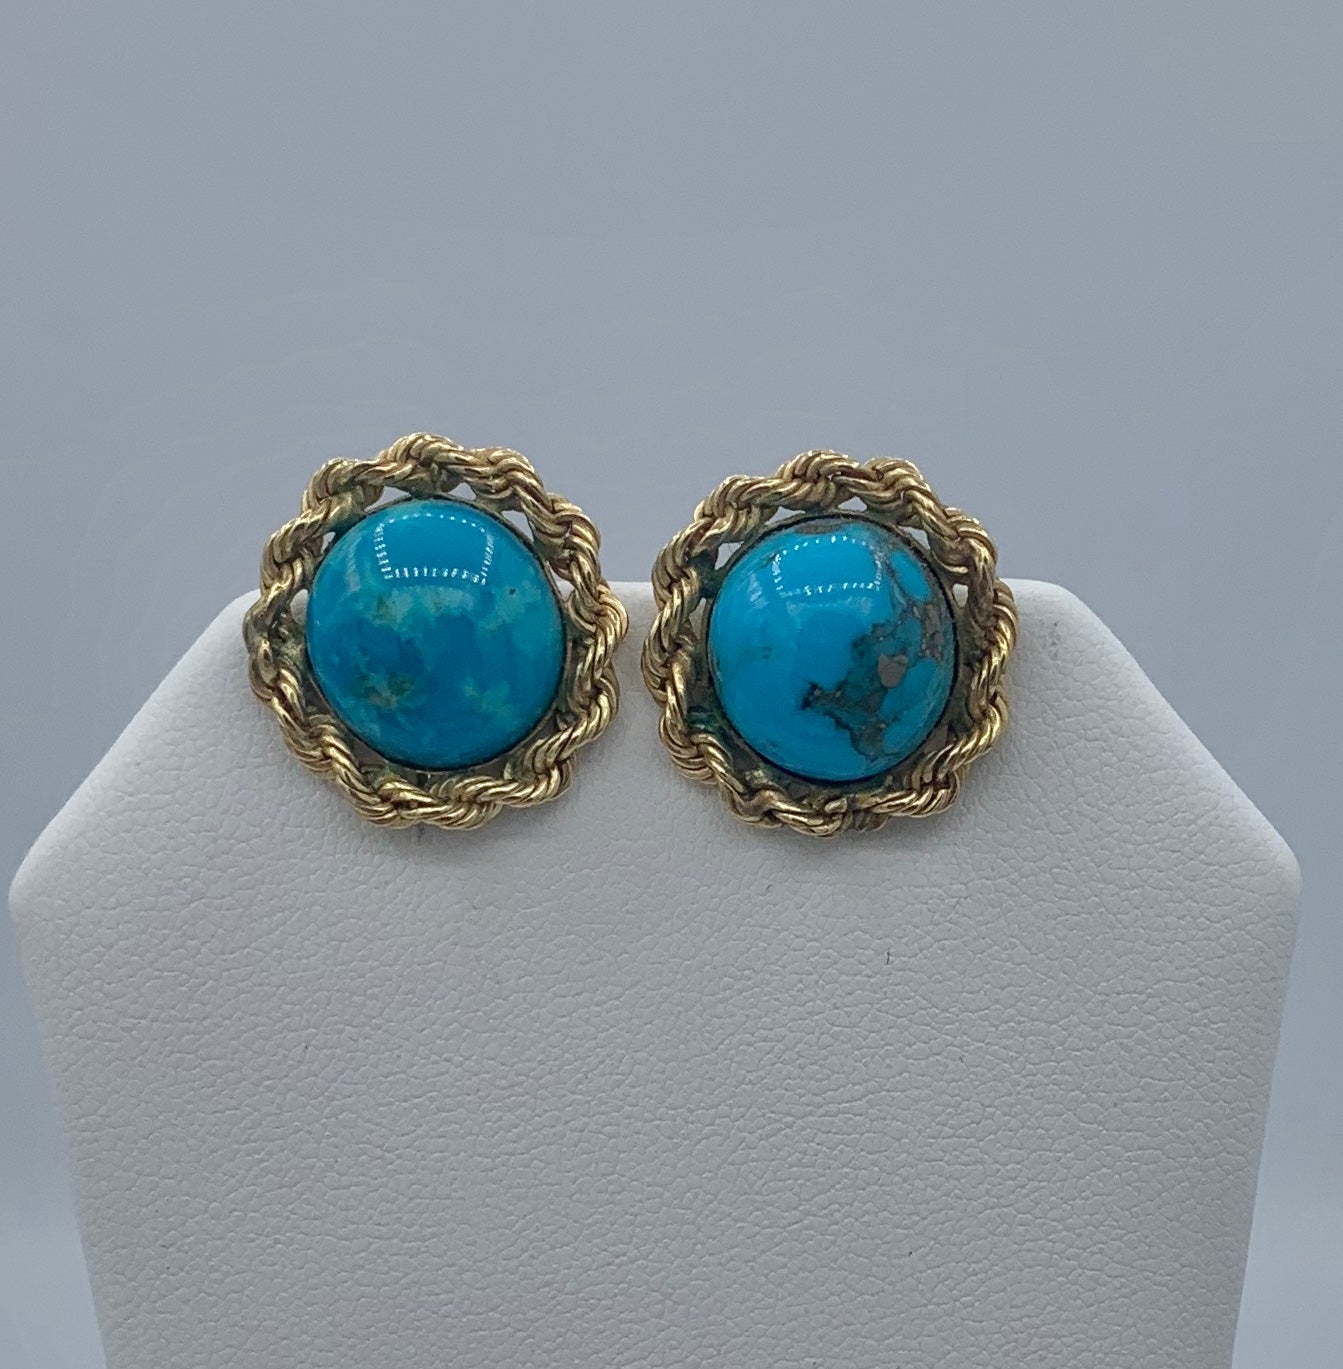 This is a gorgeous pair of Antique Retro Turquoise earrings in 14 Karat Yellow Gold.  The wonderful round Turquoise cabochons are exquisite with stunning bright blue color and beautiful matrix that I just love.  The cabochons are set in classic